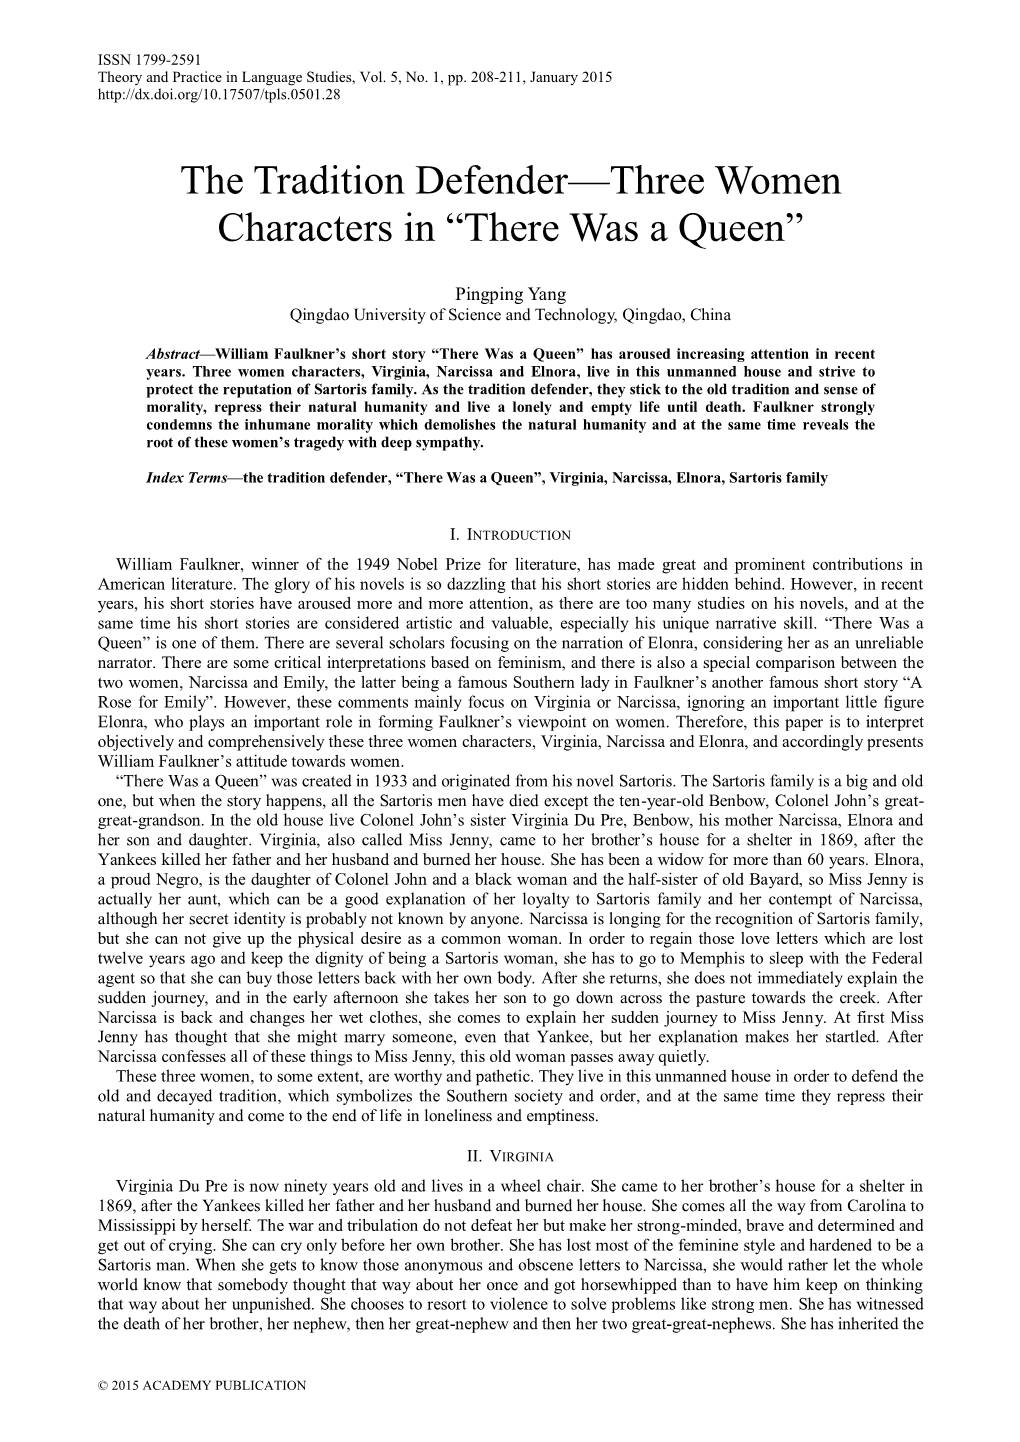 The Tradition Defender—Three Women Characters in “There Was a Queen”